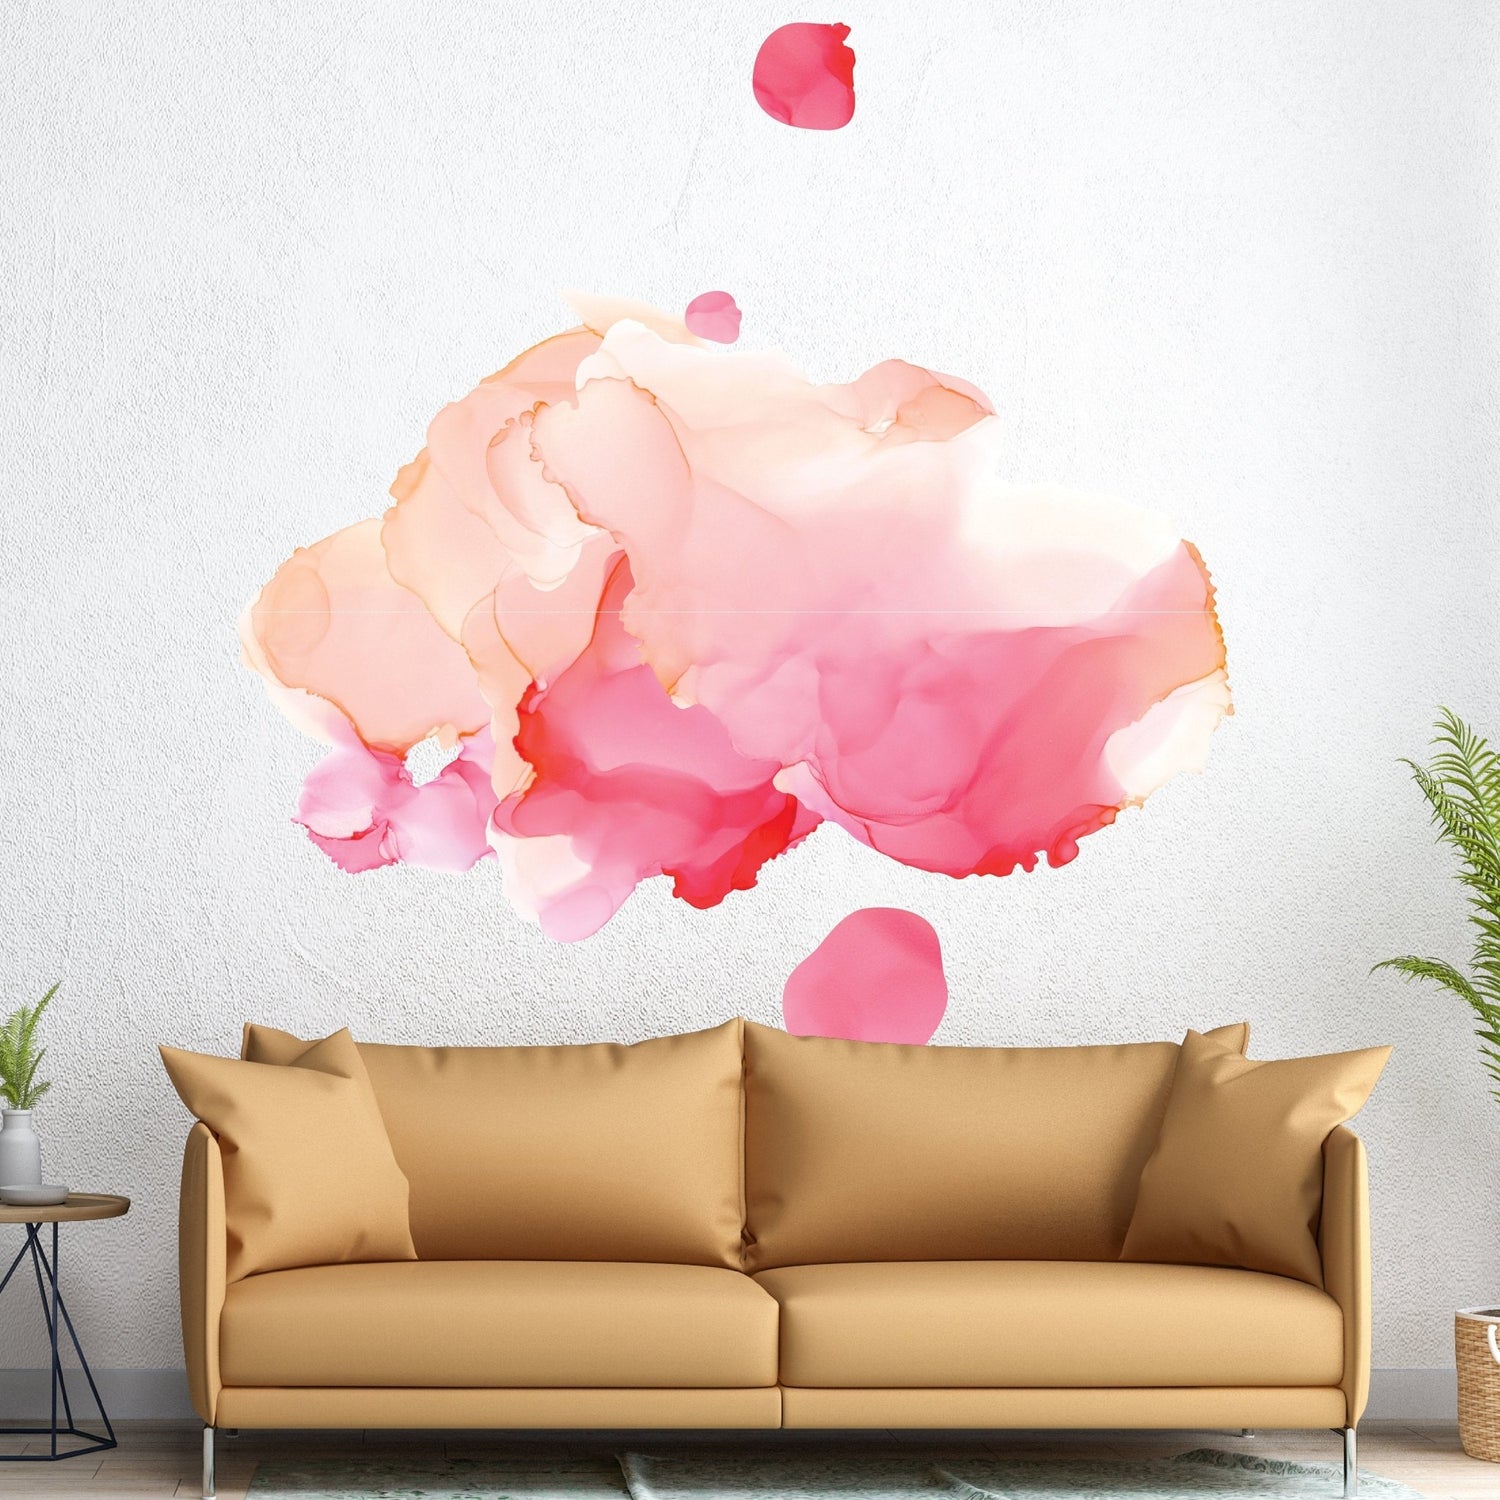 Abstract Art Decals - Picture Perfect Decals